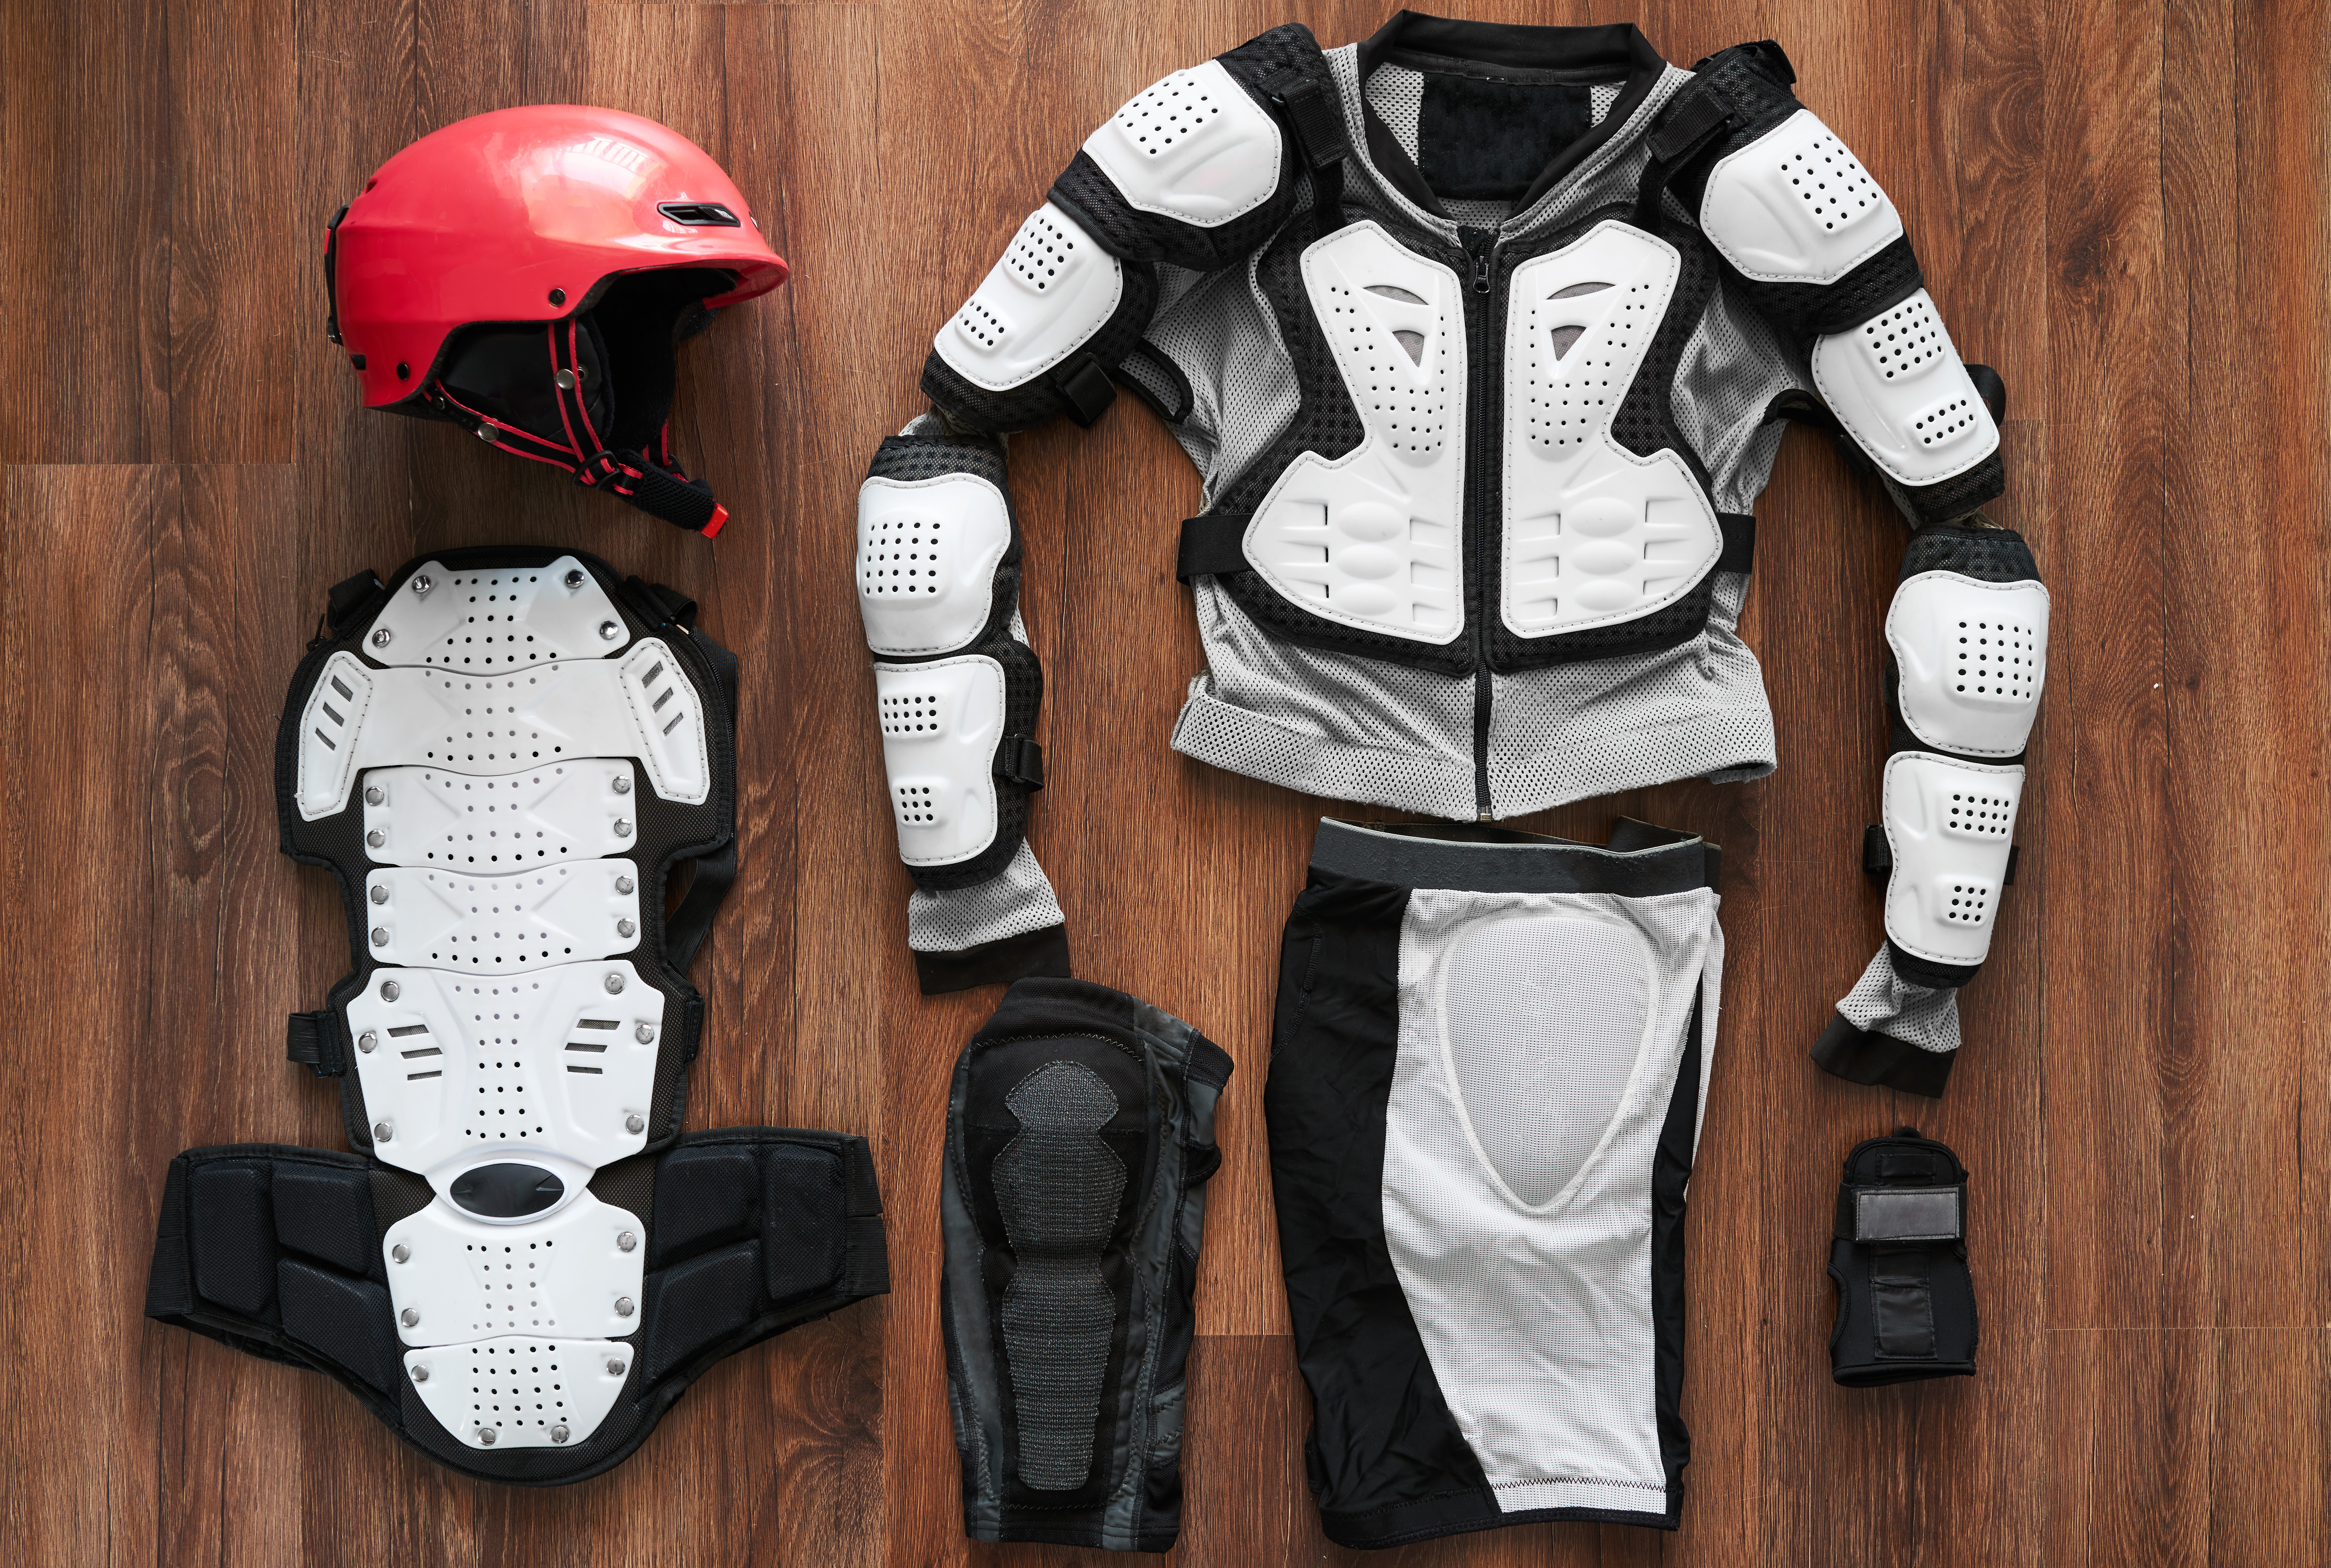 Youth Sports Protective Gear, Safety First: Youth Sports Protective Gear, Days of a Domestic Dad